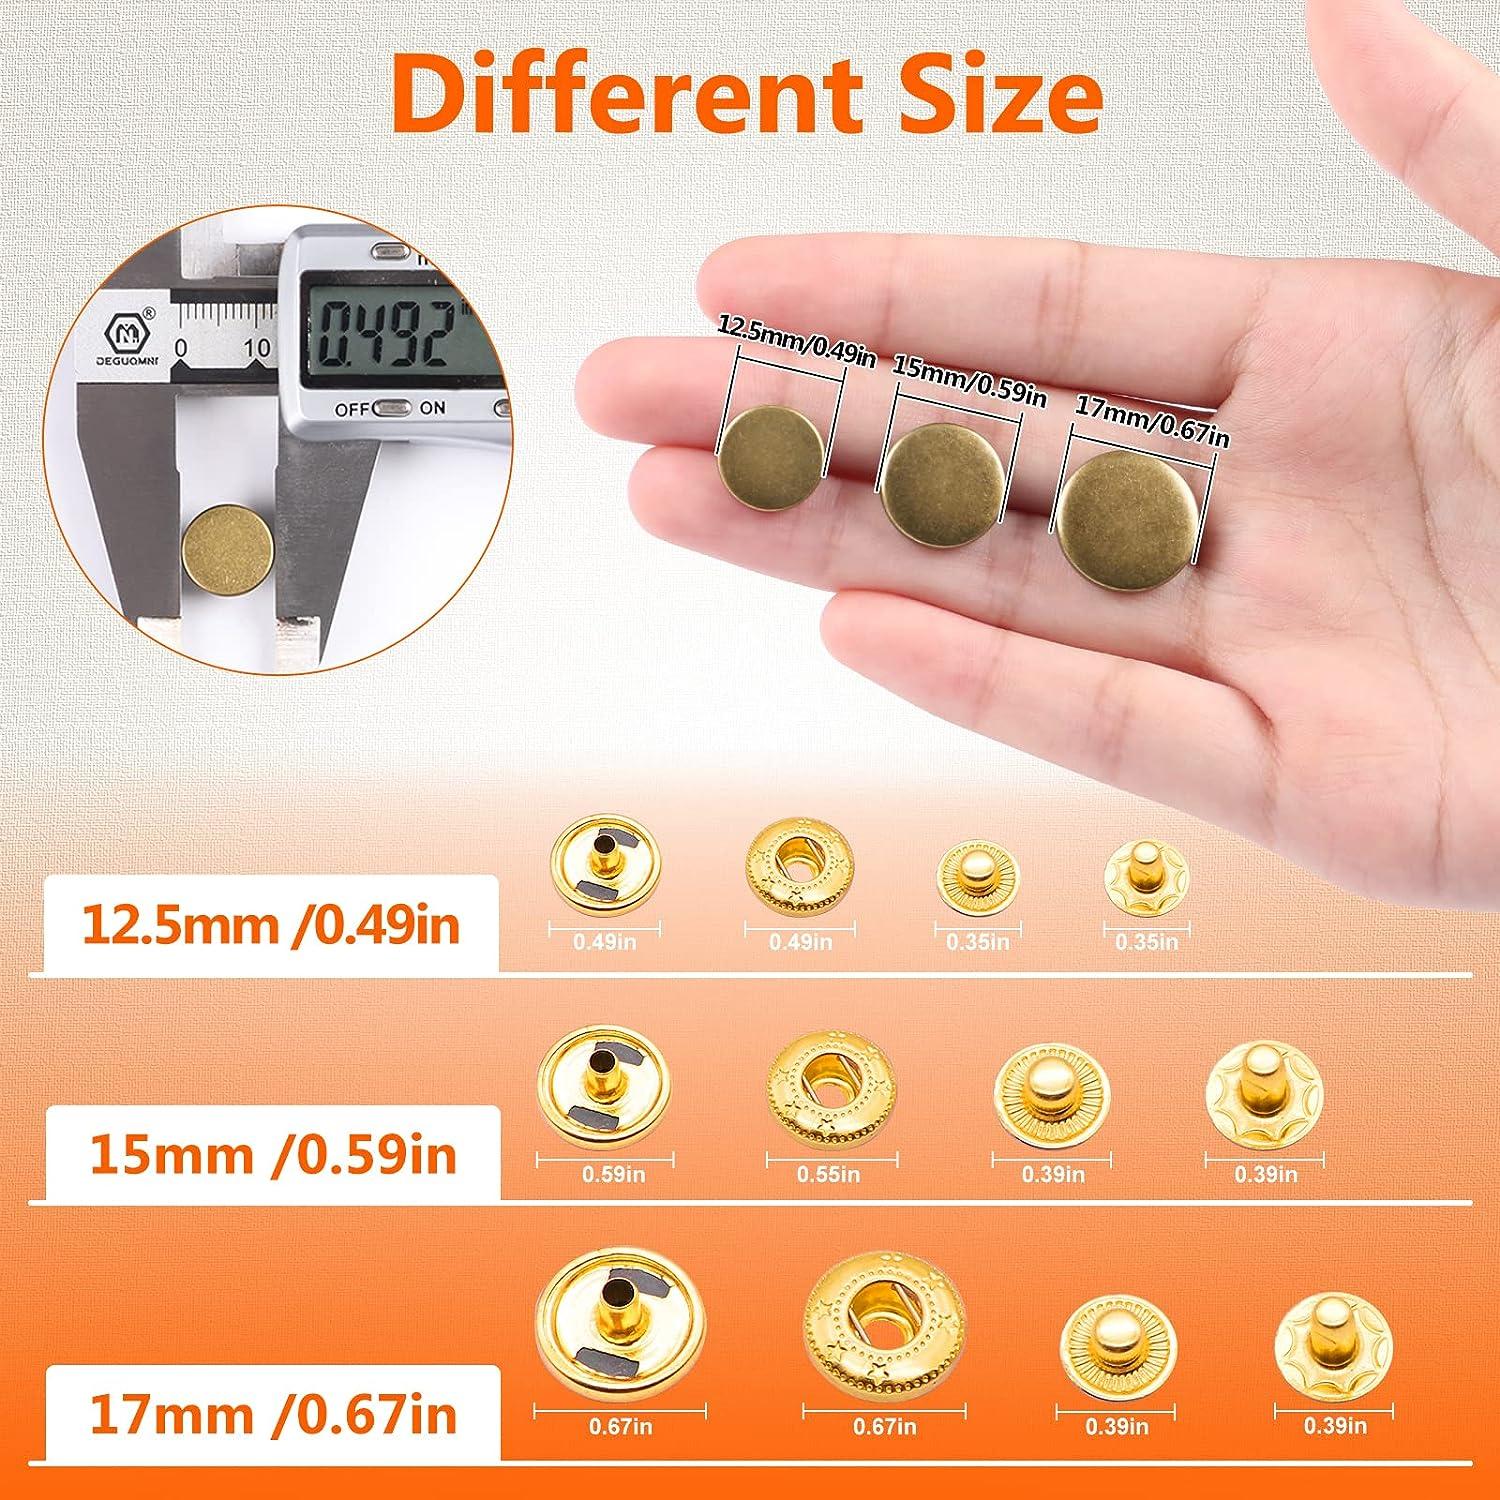 15mm Leather Snaps Fasteners Kit, 4 Color Metal Button Snap Press